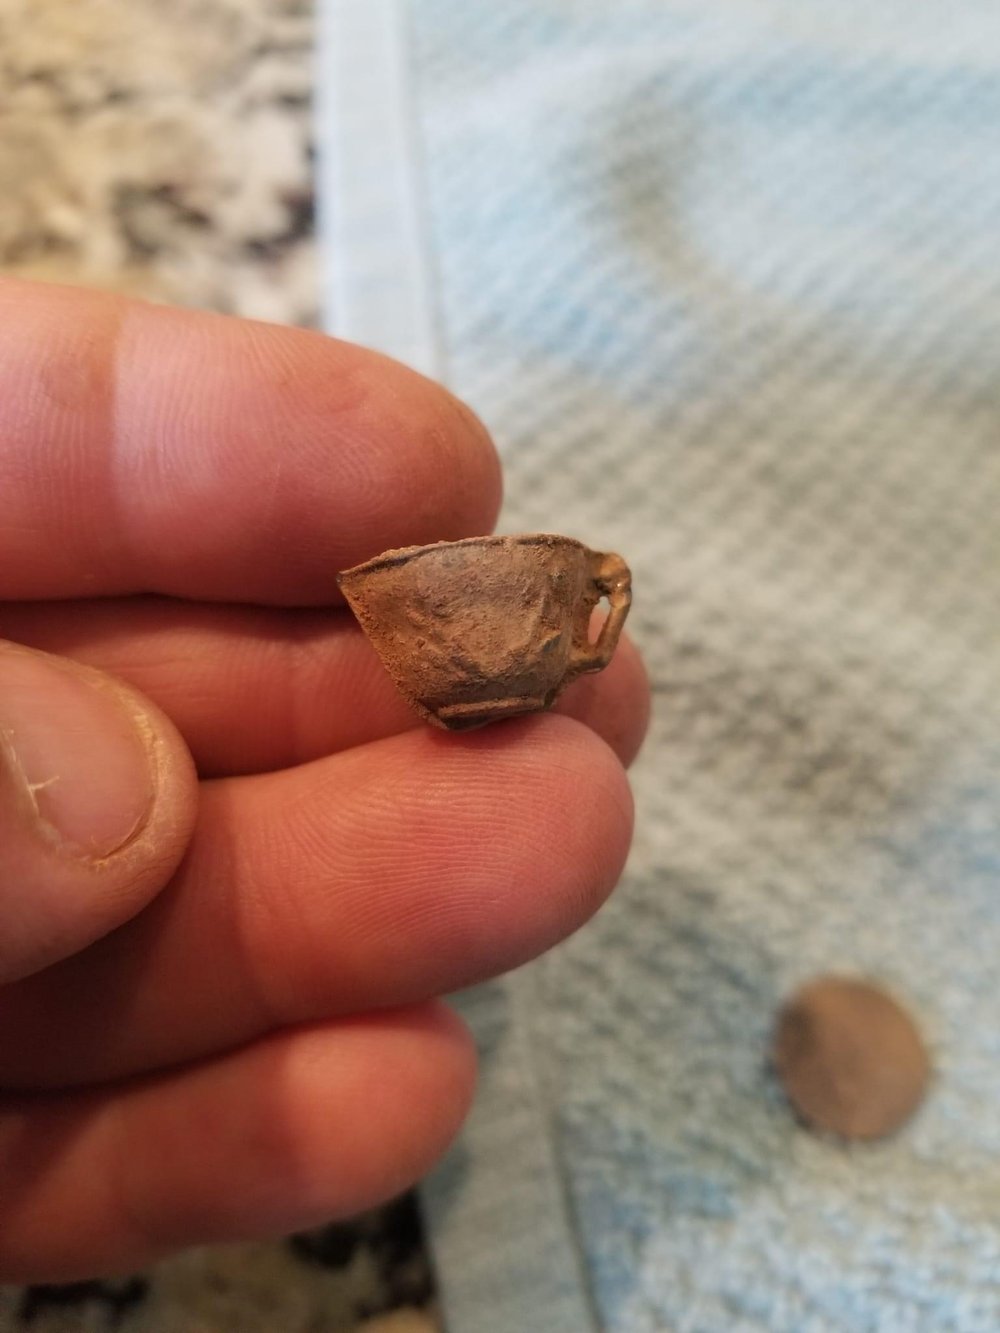 Miniature pewter tea cup, likely a child's toy, found by John Hunt. At the event, John's young son won a metal detector during the raffle, and is now a passionate relic hunter!